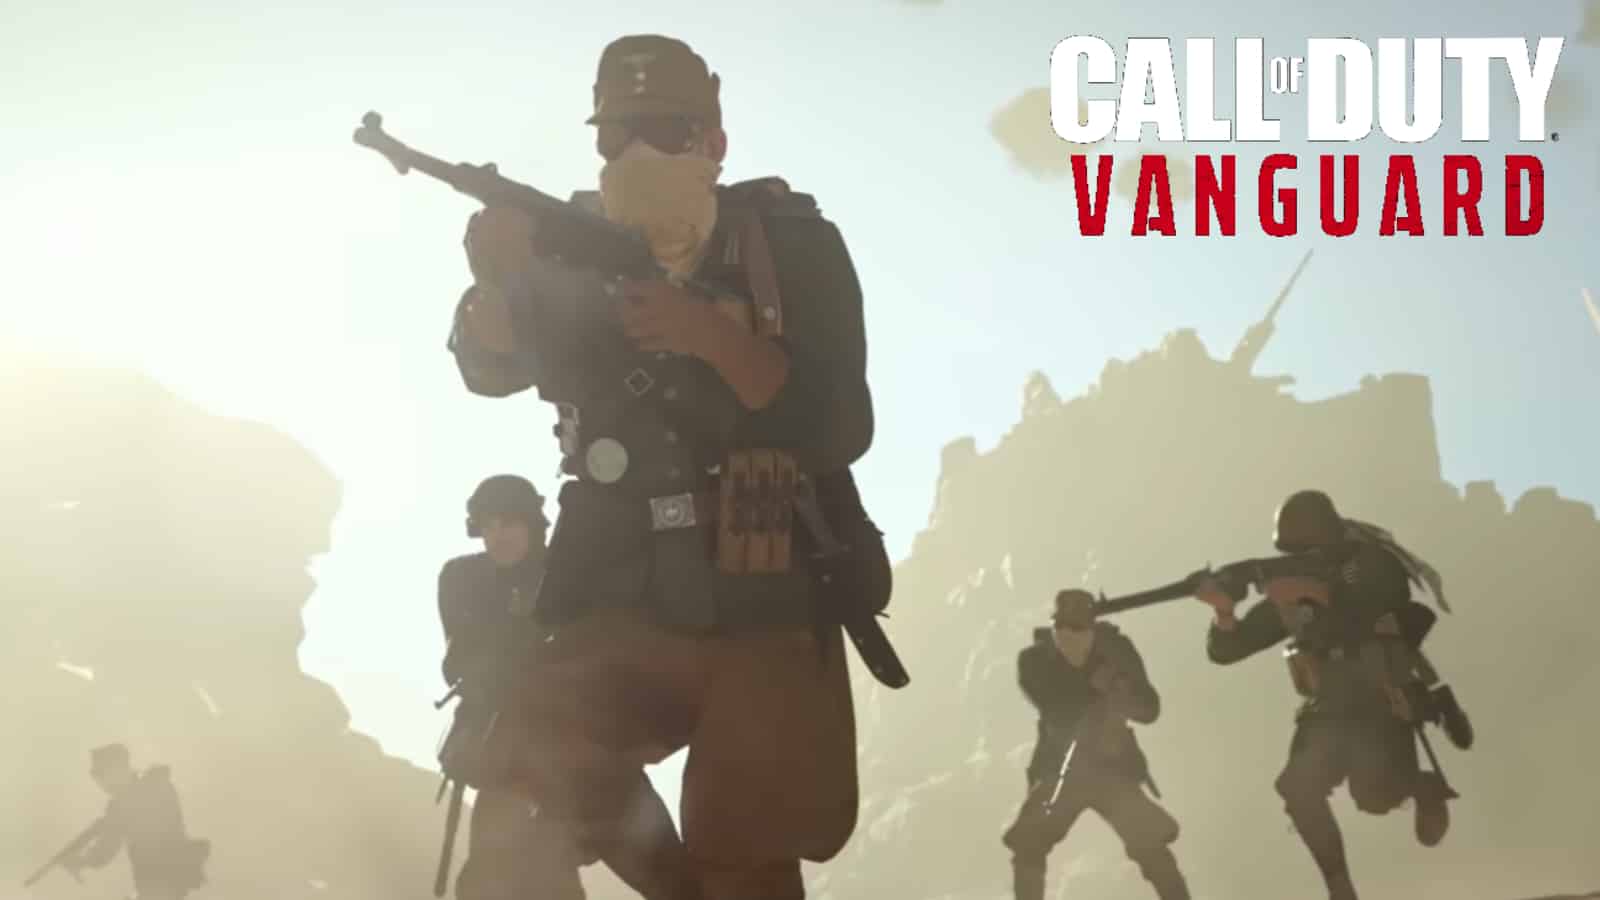 Call of Duty: Vanguard — Another year, another war